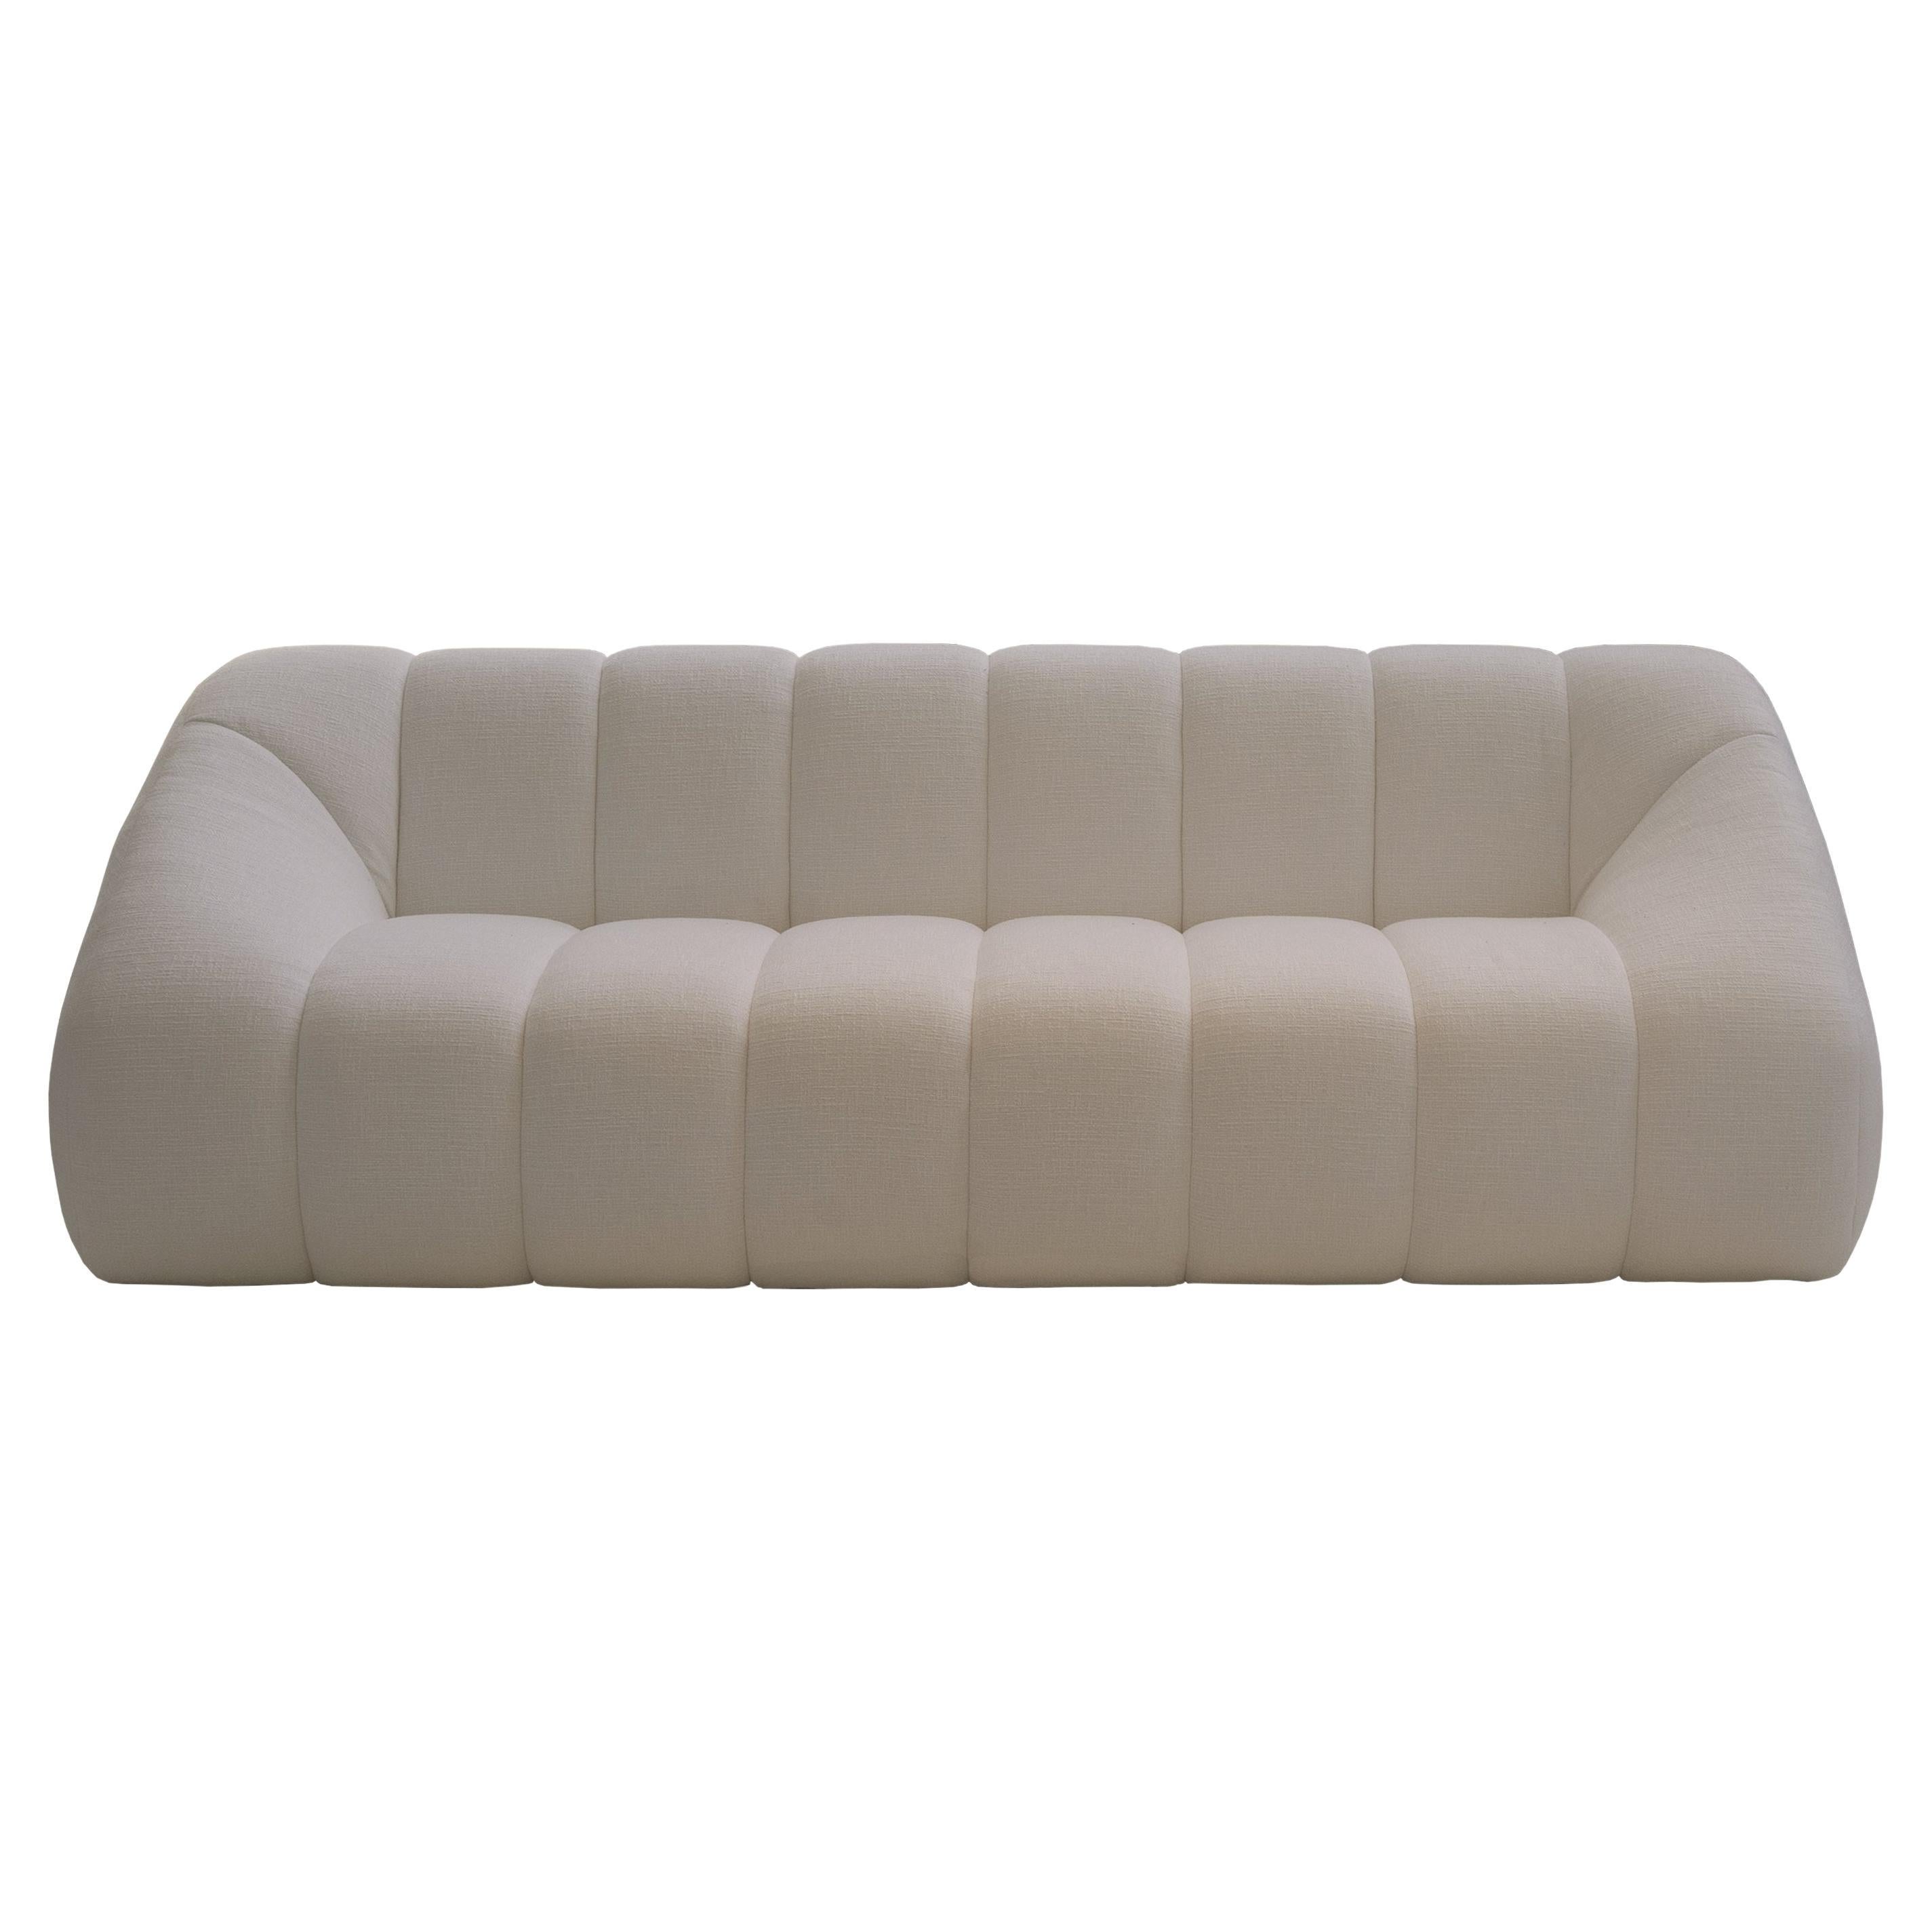 NEW 3-seater sofa in white fabric. By Legame Italia For Sale